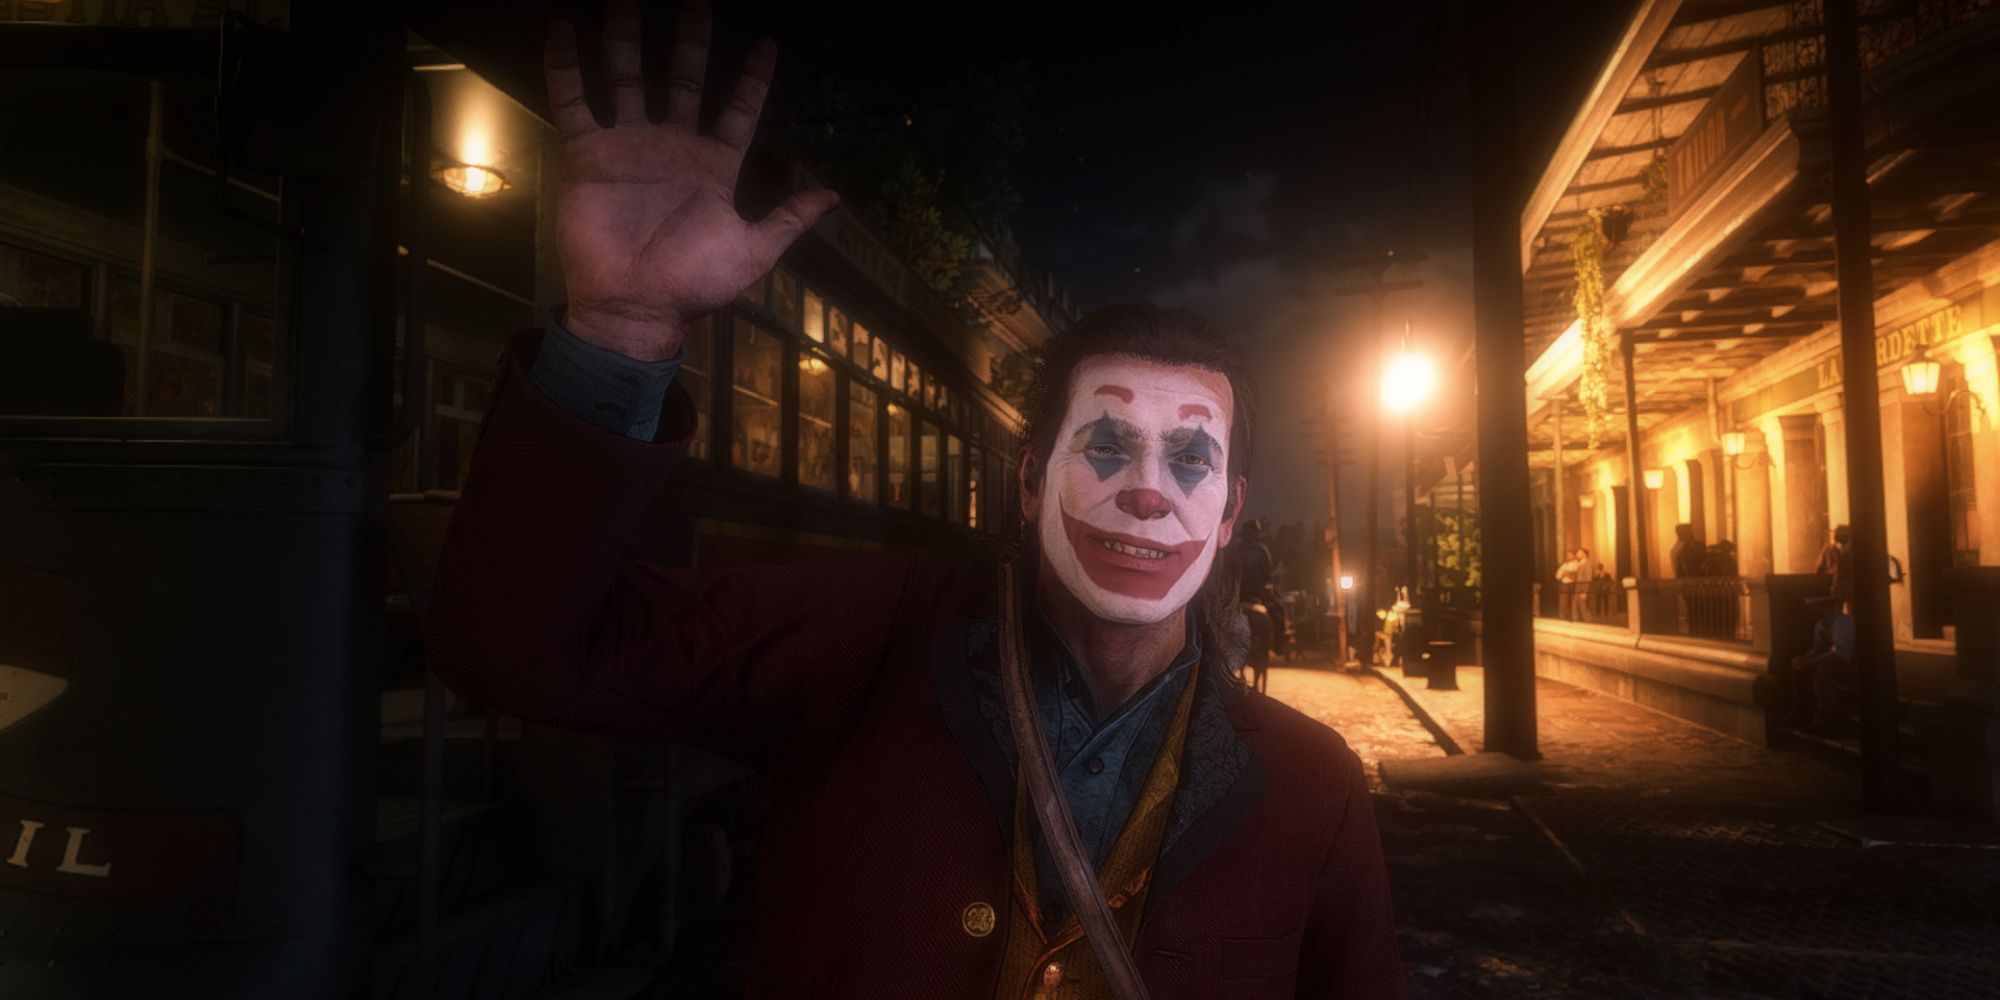 An image of Arthur from Red Dead Redemption 2 dressed as the Joker.